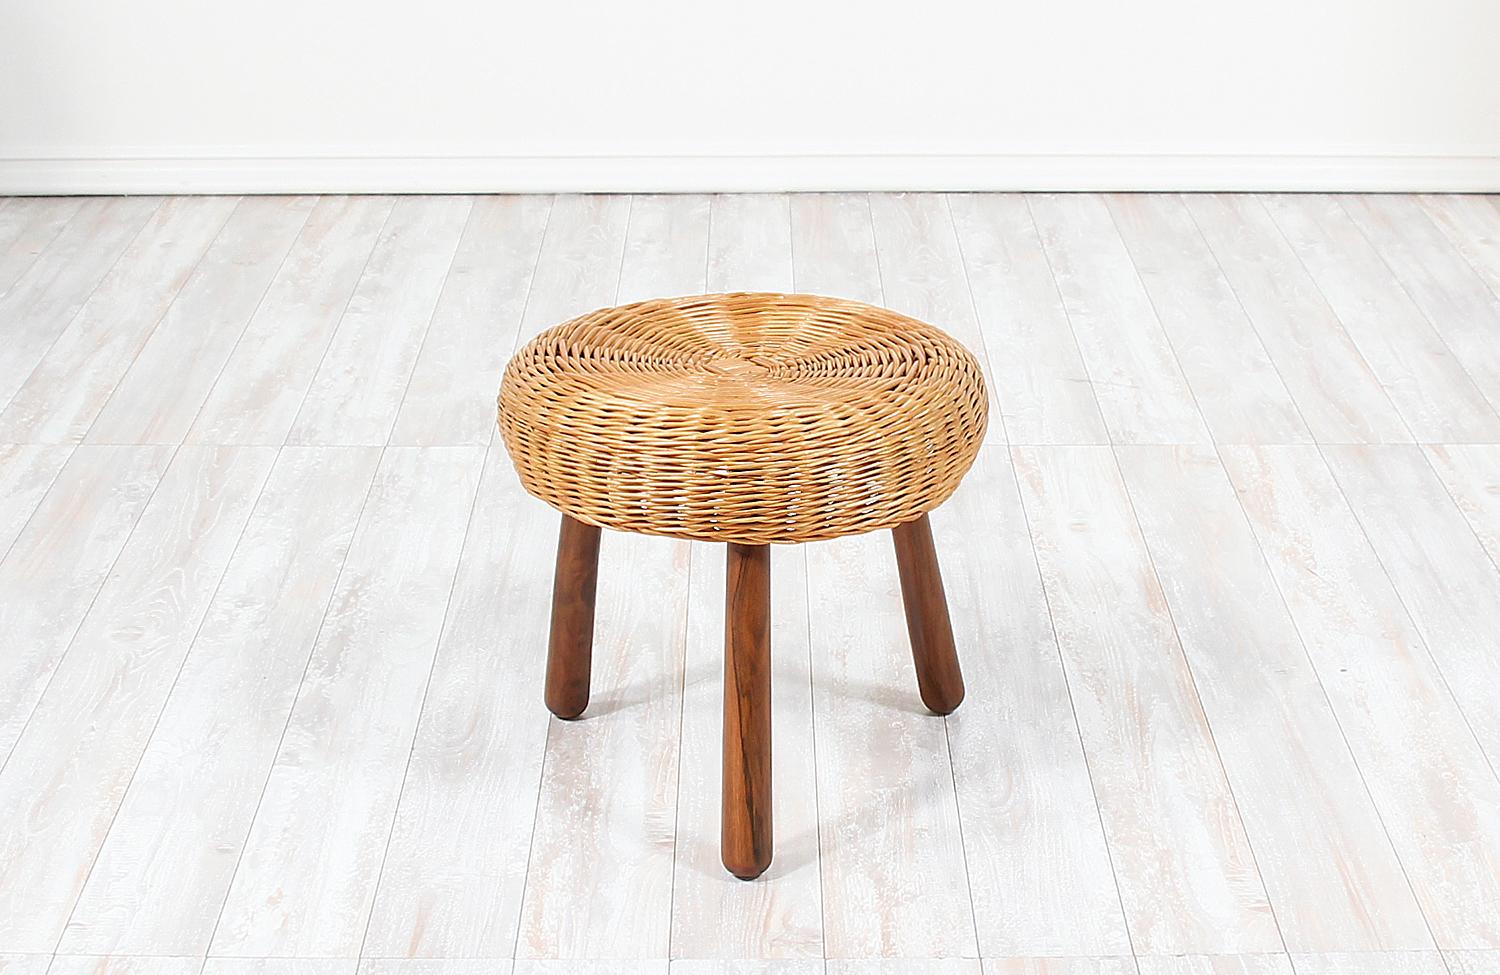 Mid-Century Modern tripod stool designed and manufactured in the United States, circa 1960s. This versatile wicker stool features its original round wicker top supported by walnut wood tripod legs with vibrant grain patterns that capture the essence